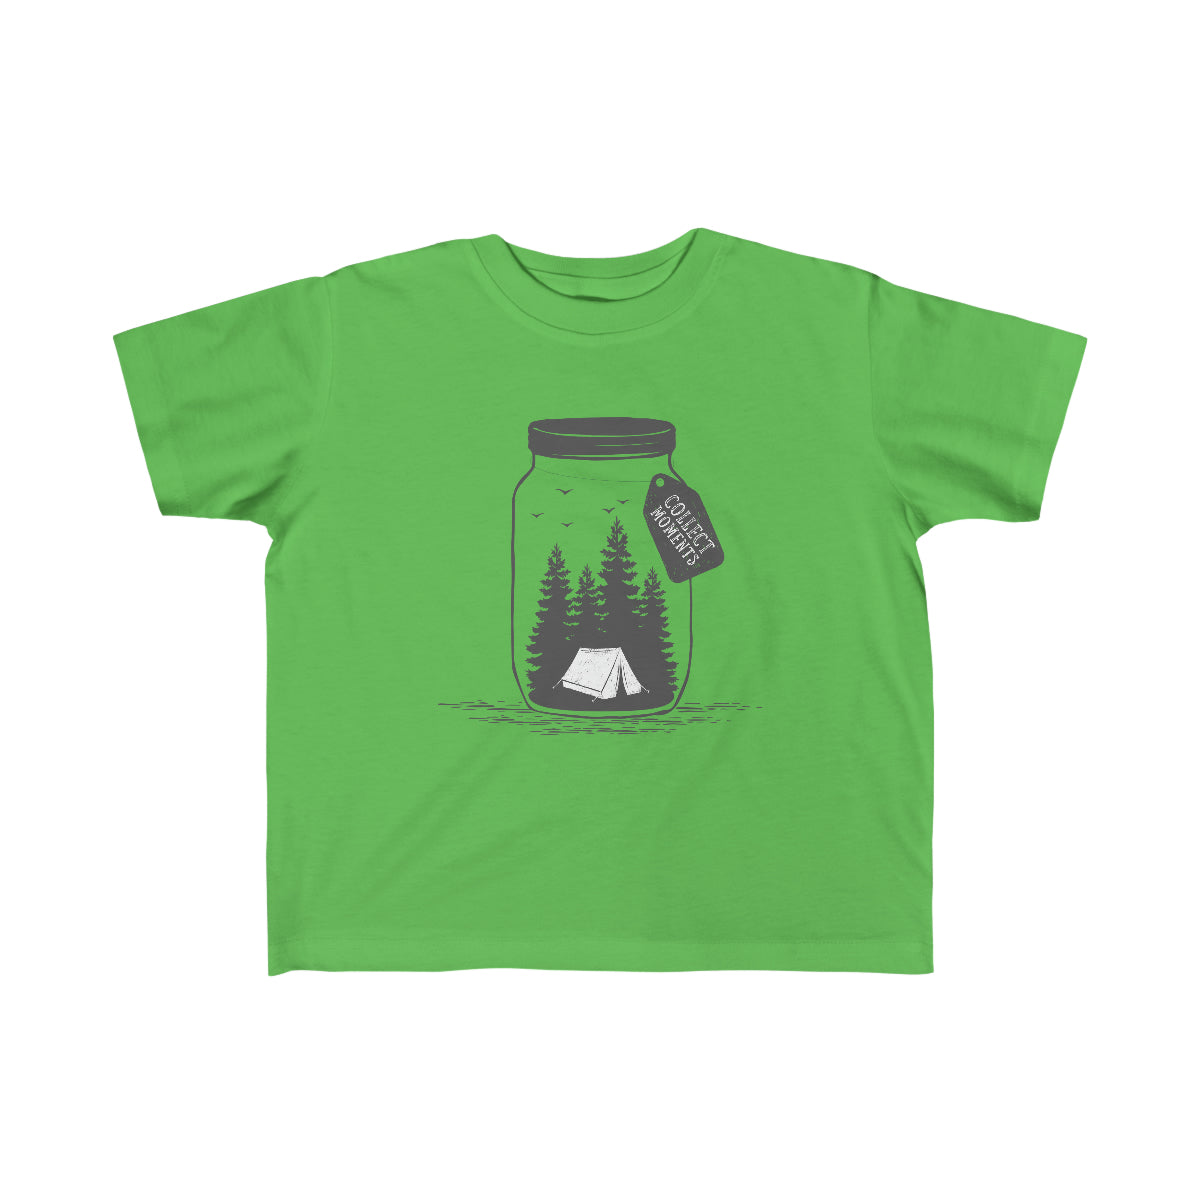 Collect Moments Not Things Toddler Tee Apple / 2T - The Northwest Store